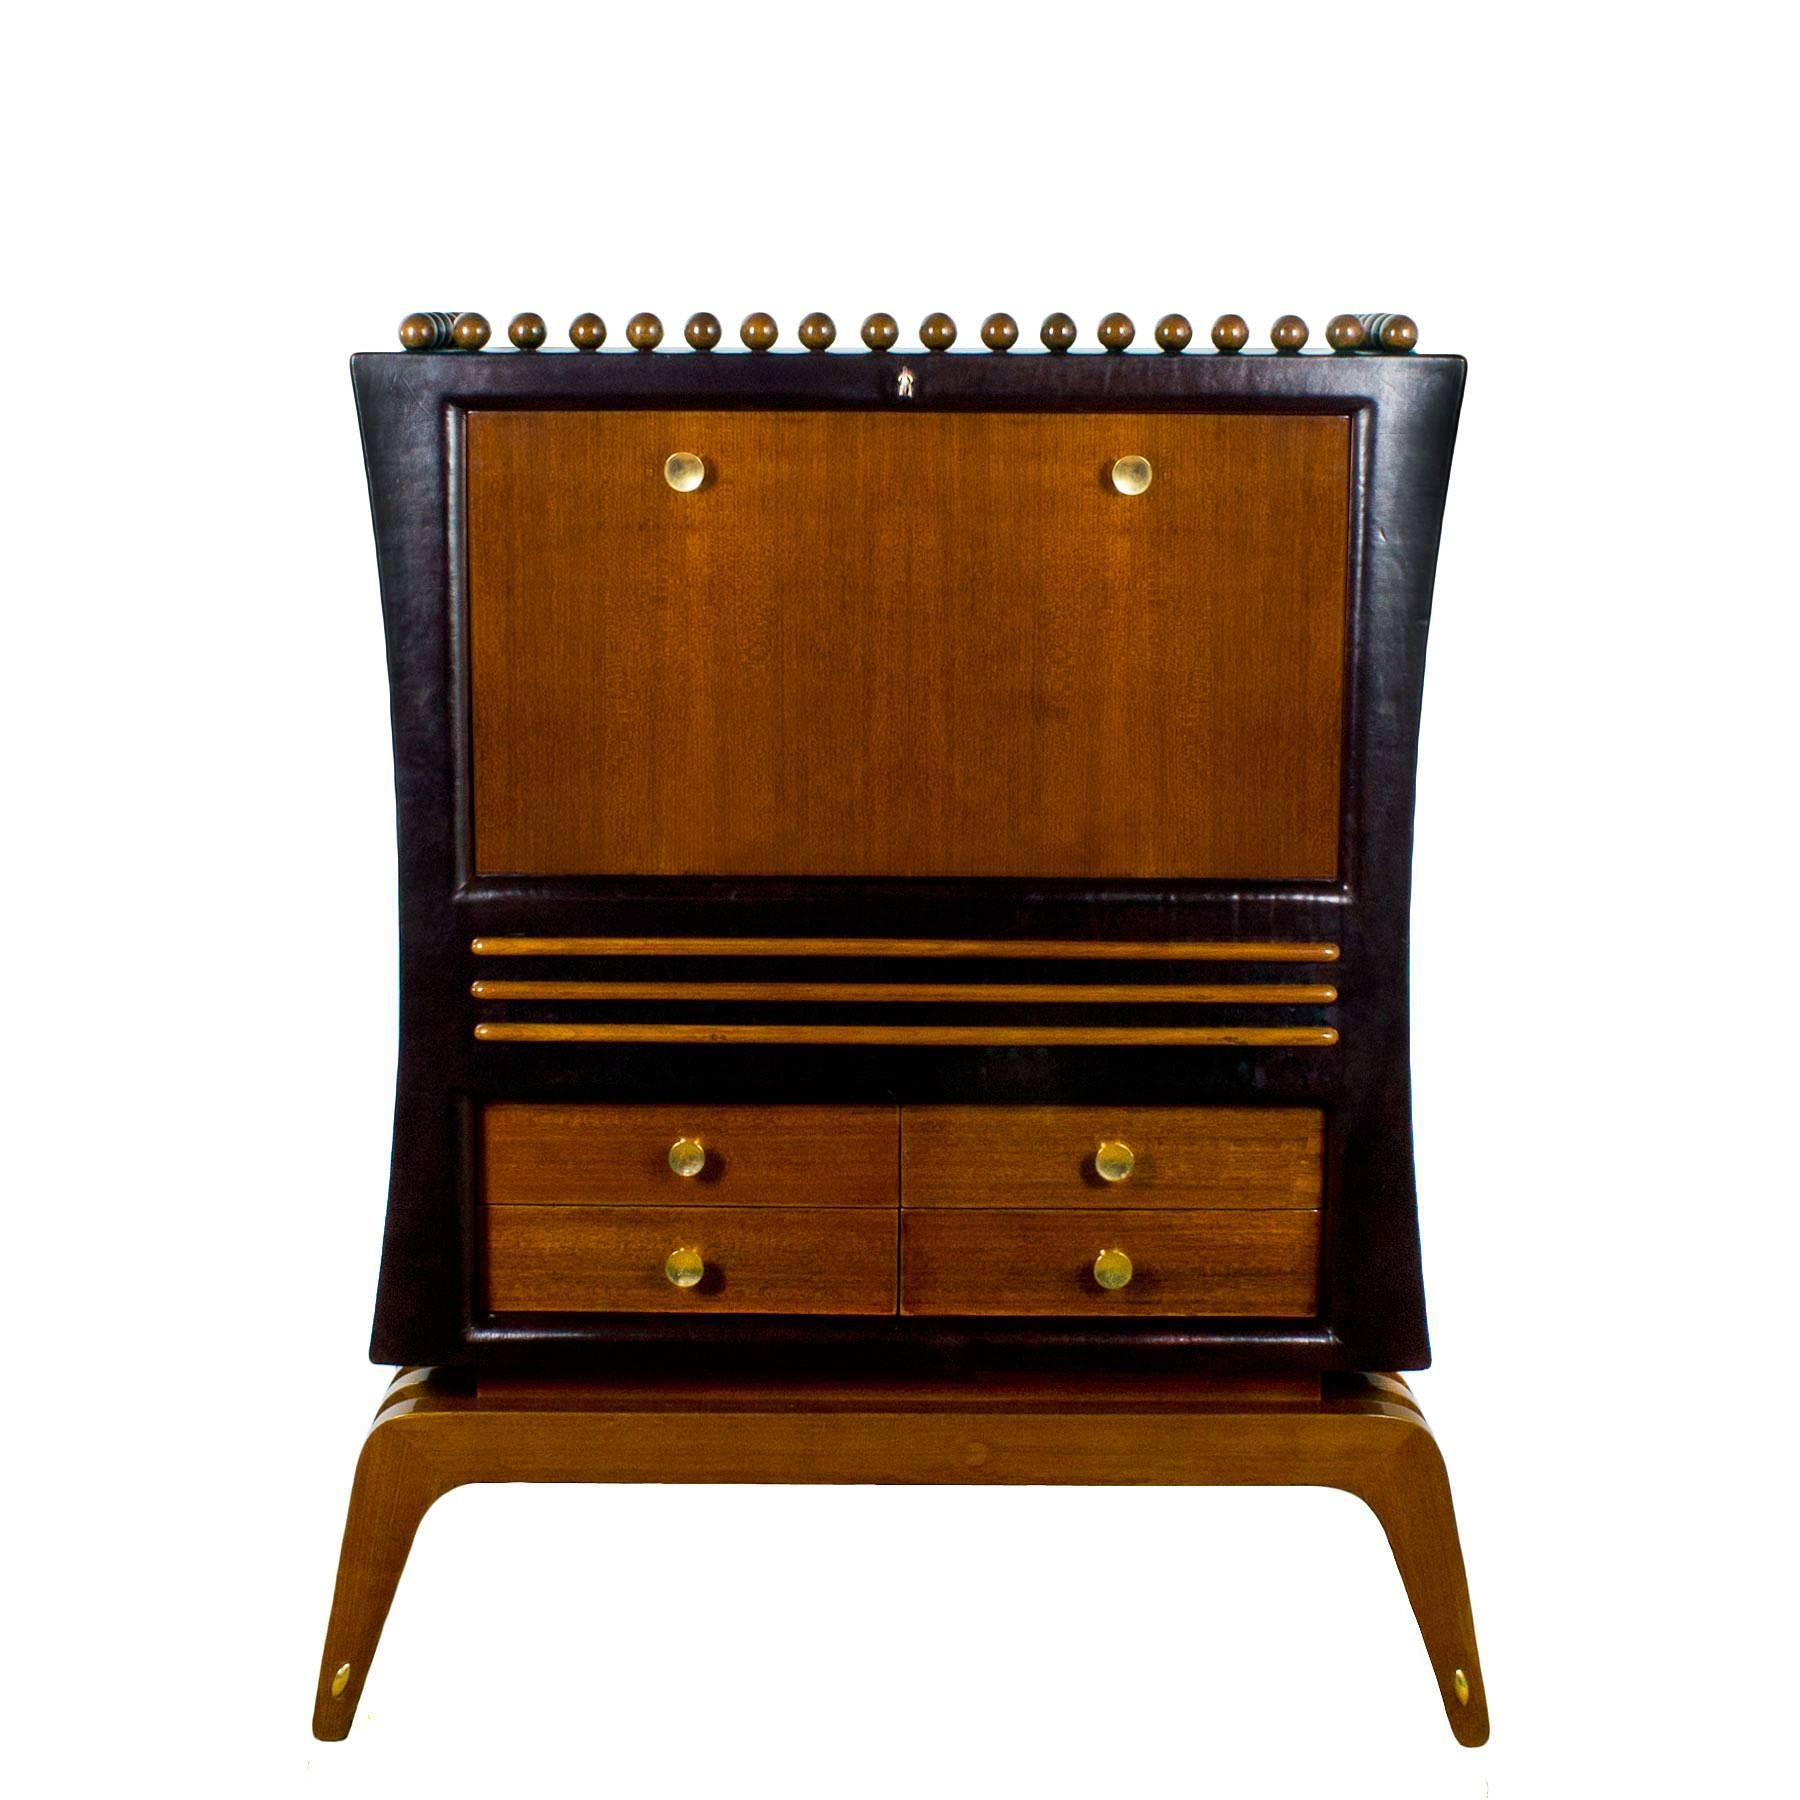 Uncommon Art Deco dry bar, solid wood thick chocolate leather upholstery. Base, drawers and flap door with African mahogany veneer, solid African mahogany balls and strips, French polish. Polished brass handles and decorative hardware. Spectacular